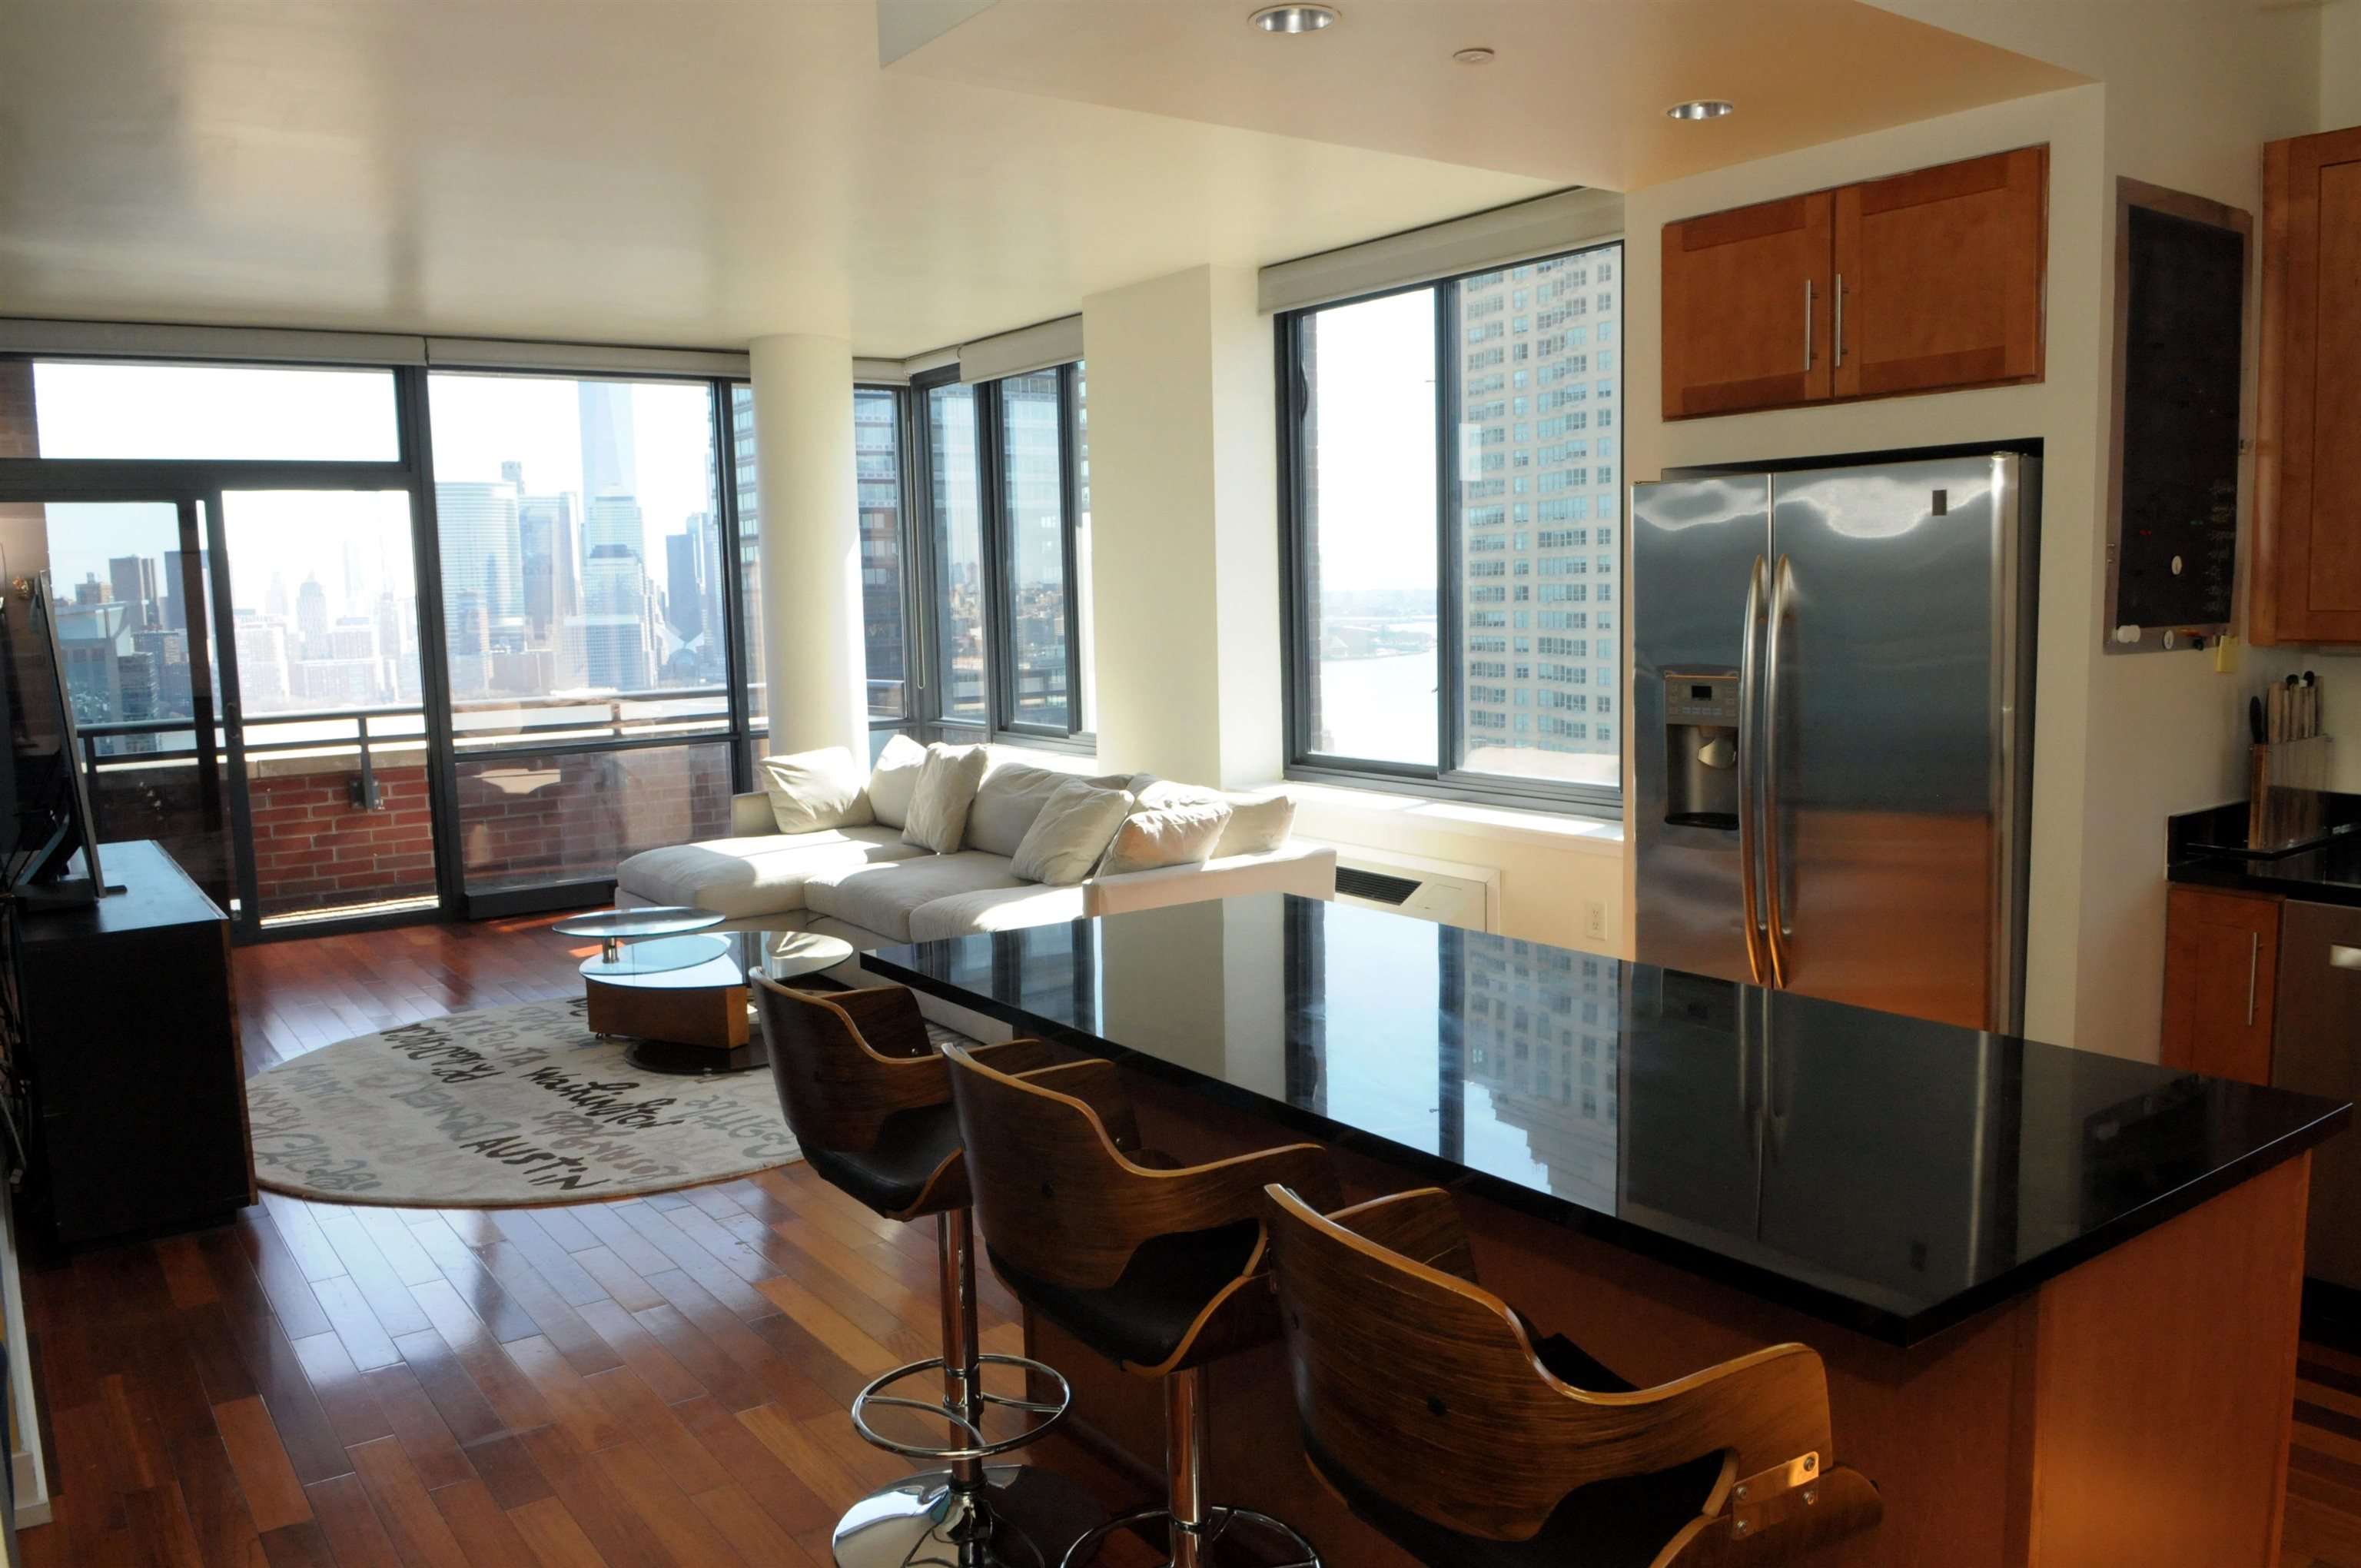 # 240004889 - For Rent in JERSEY CITY - Downtown NJ